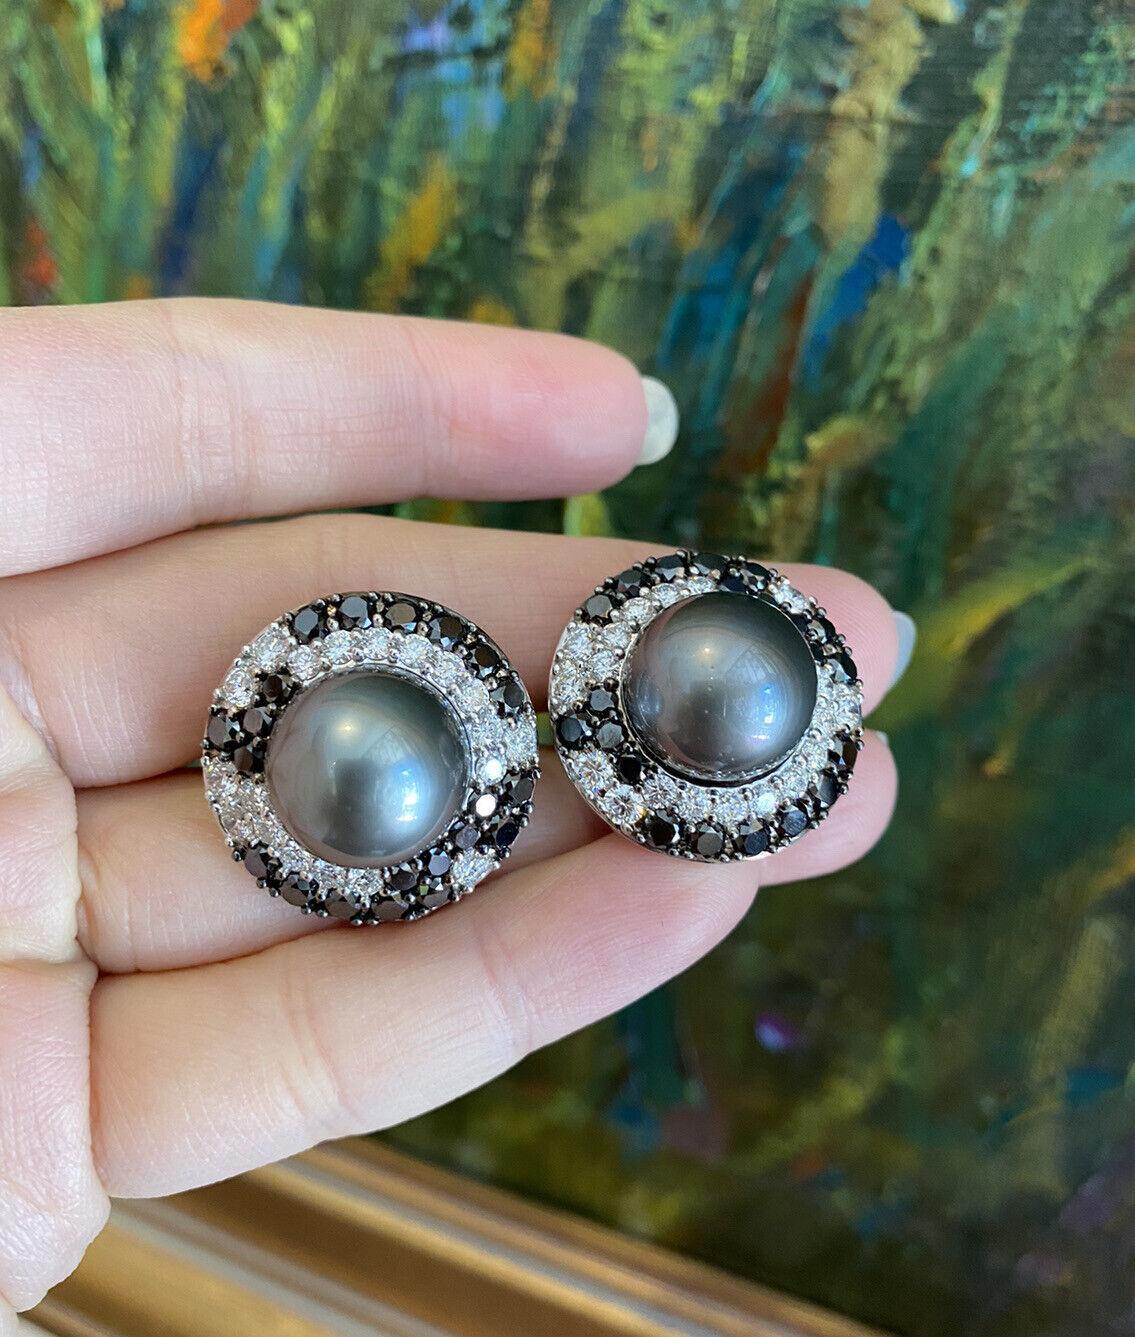 Tahitian Black Pearl Earrings with Black and White Diamonds in 18k White Gold In Excellent Condition For Sale In La Jolla, CA